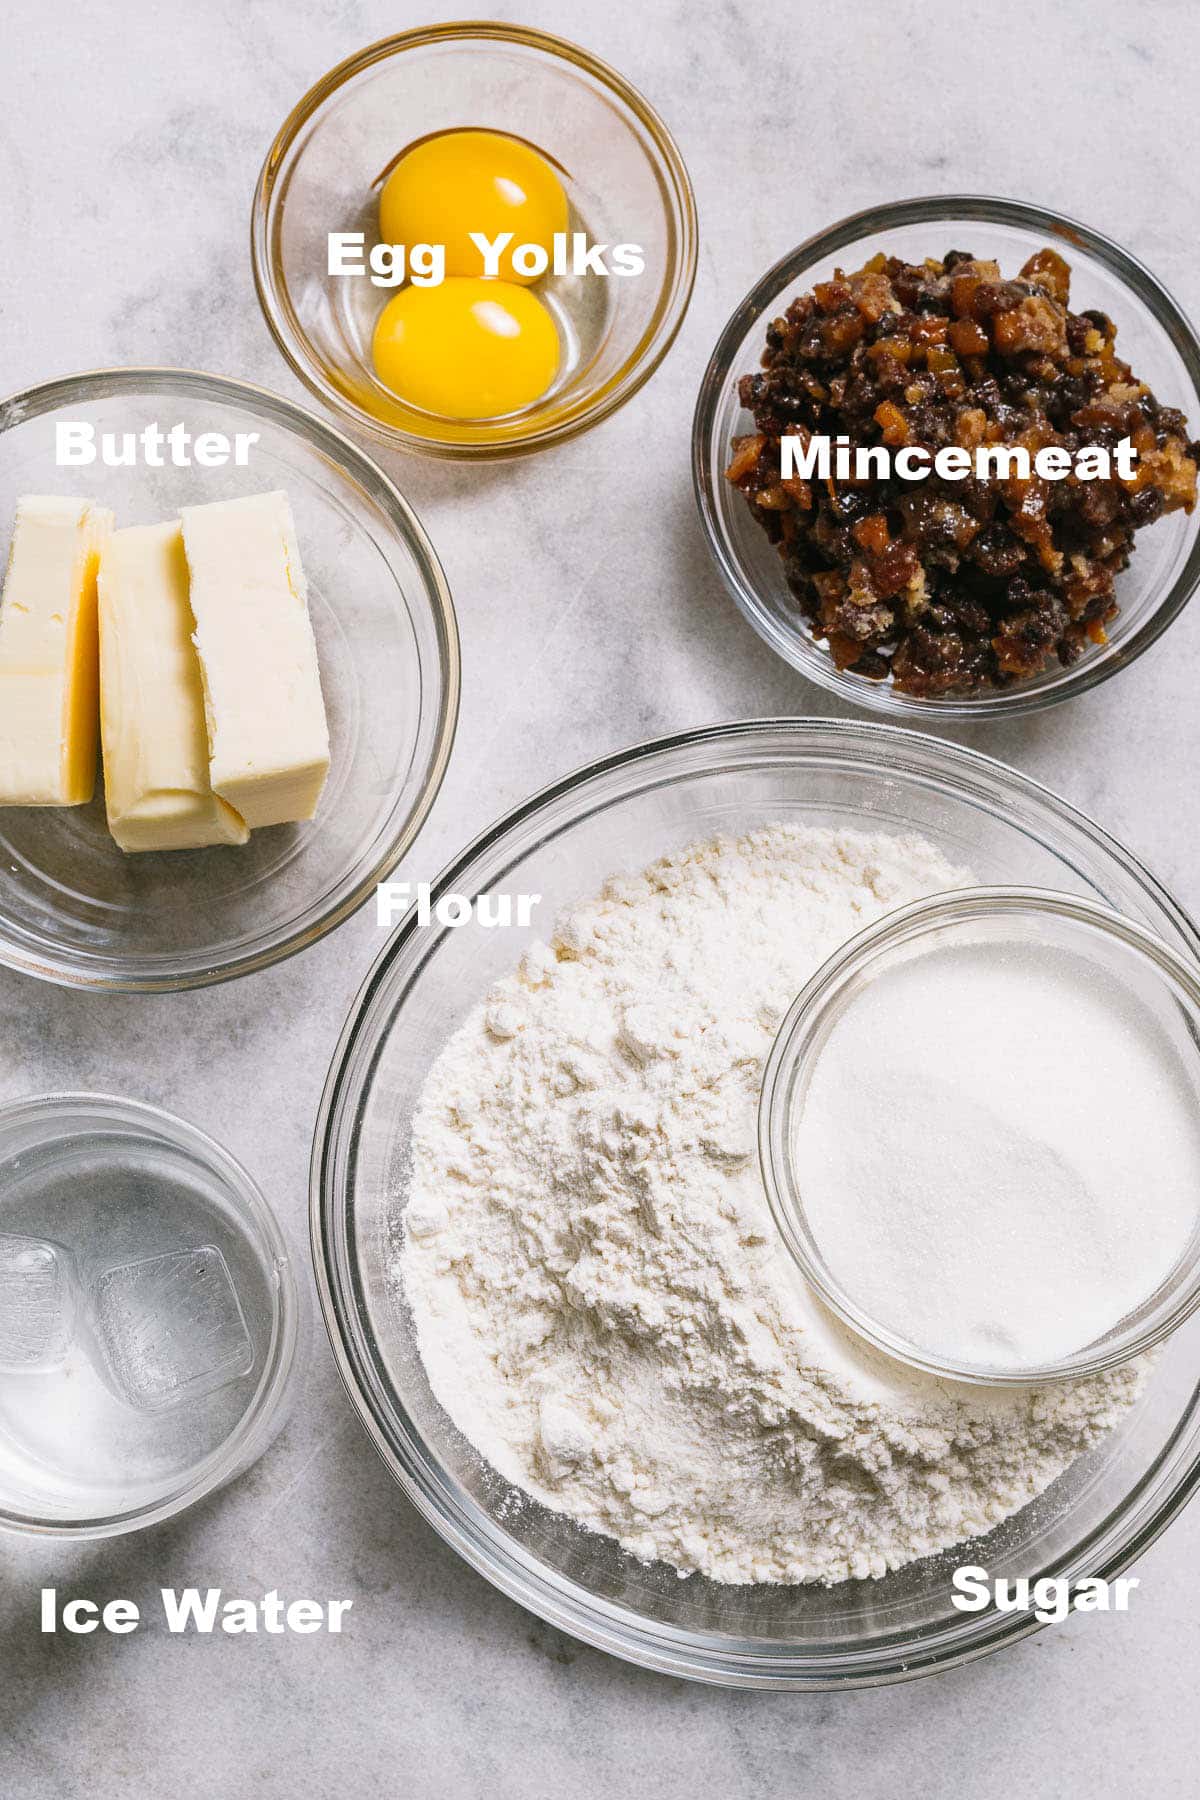 Mincemeat tart ingredients with labels.